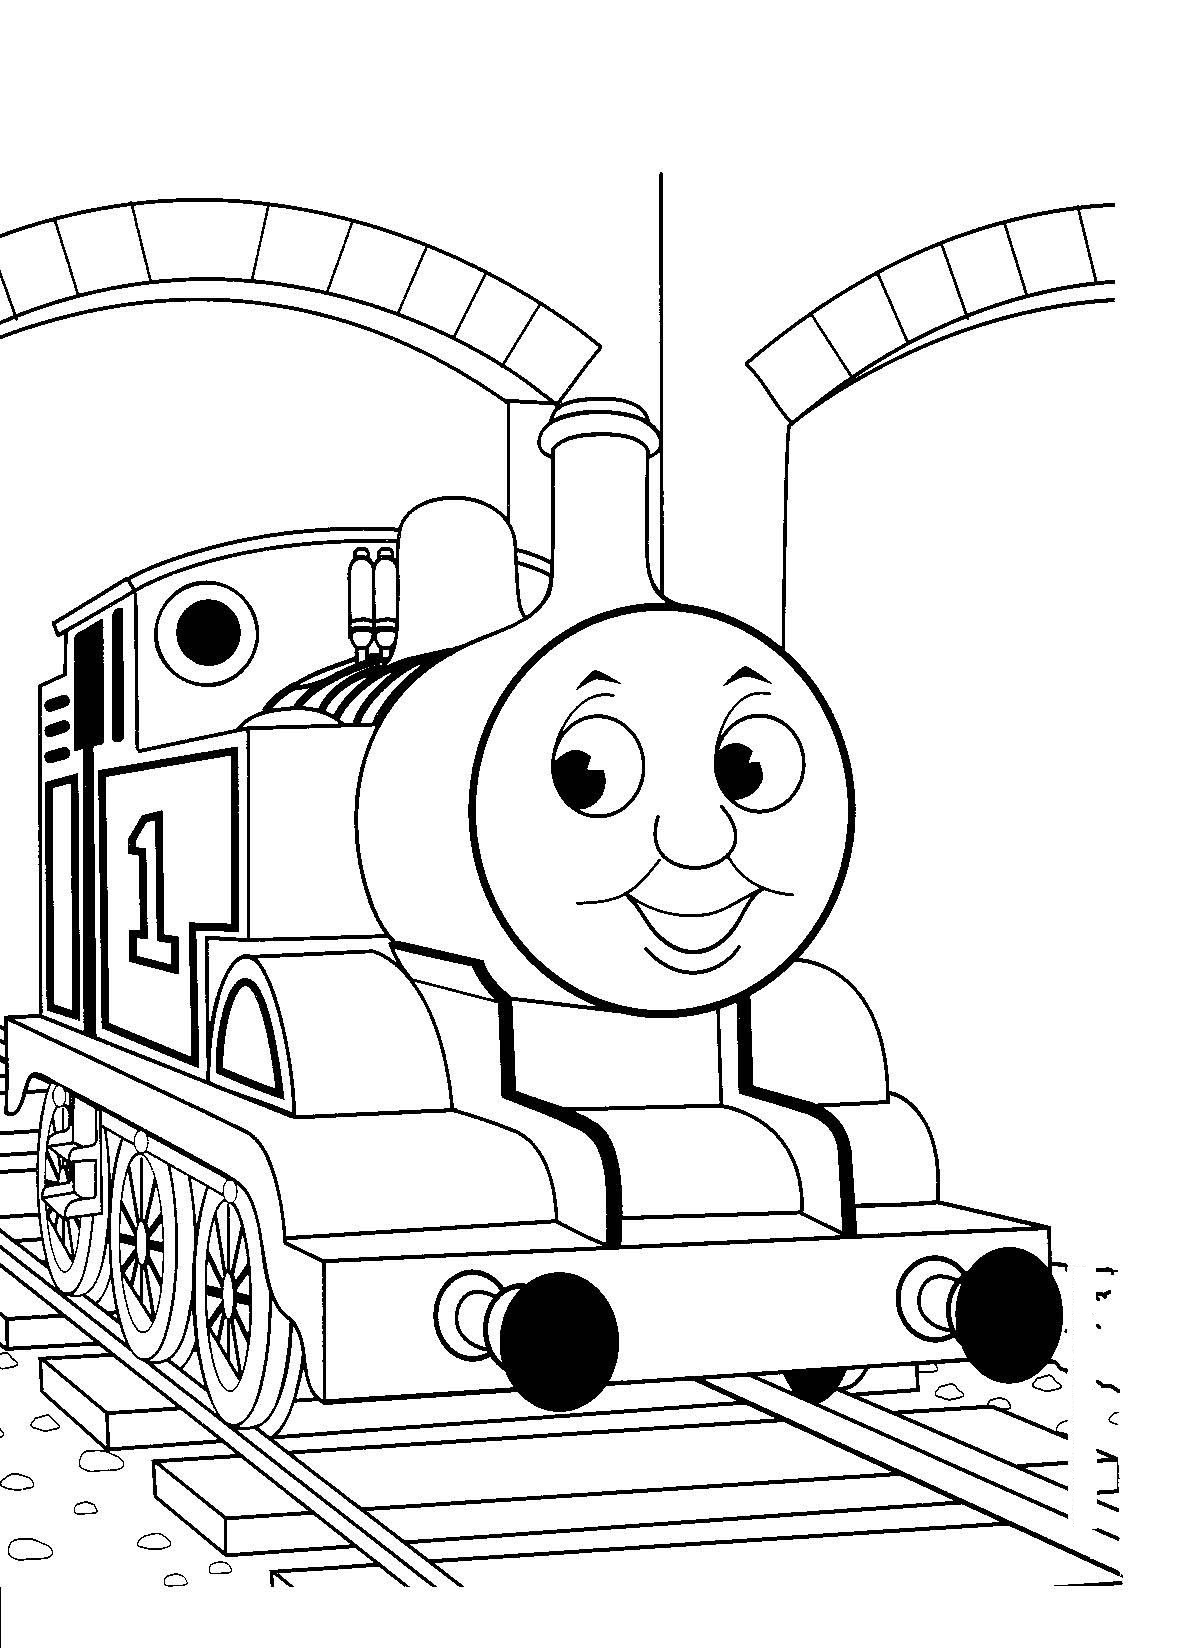 Coloring Pages | Train Coloring Pages